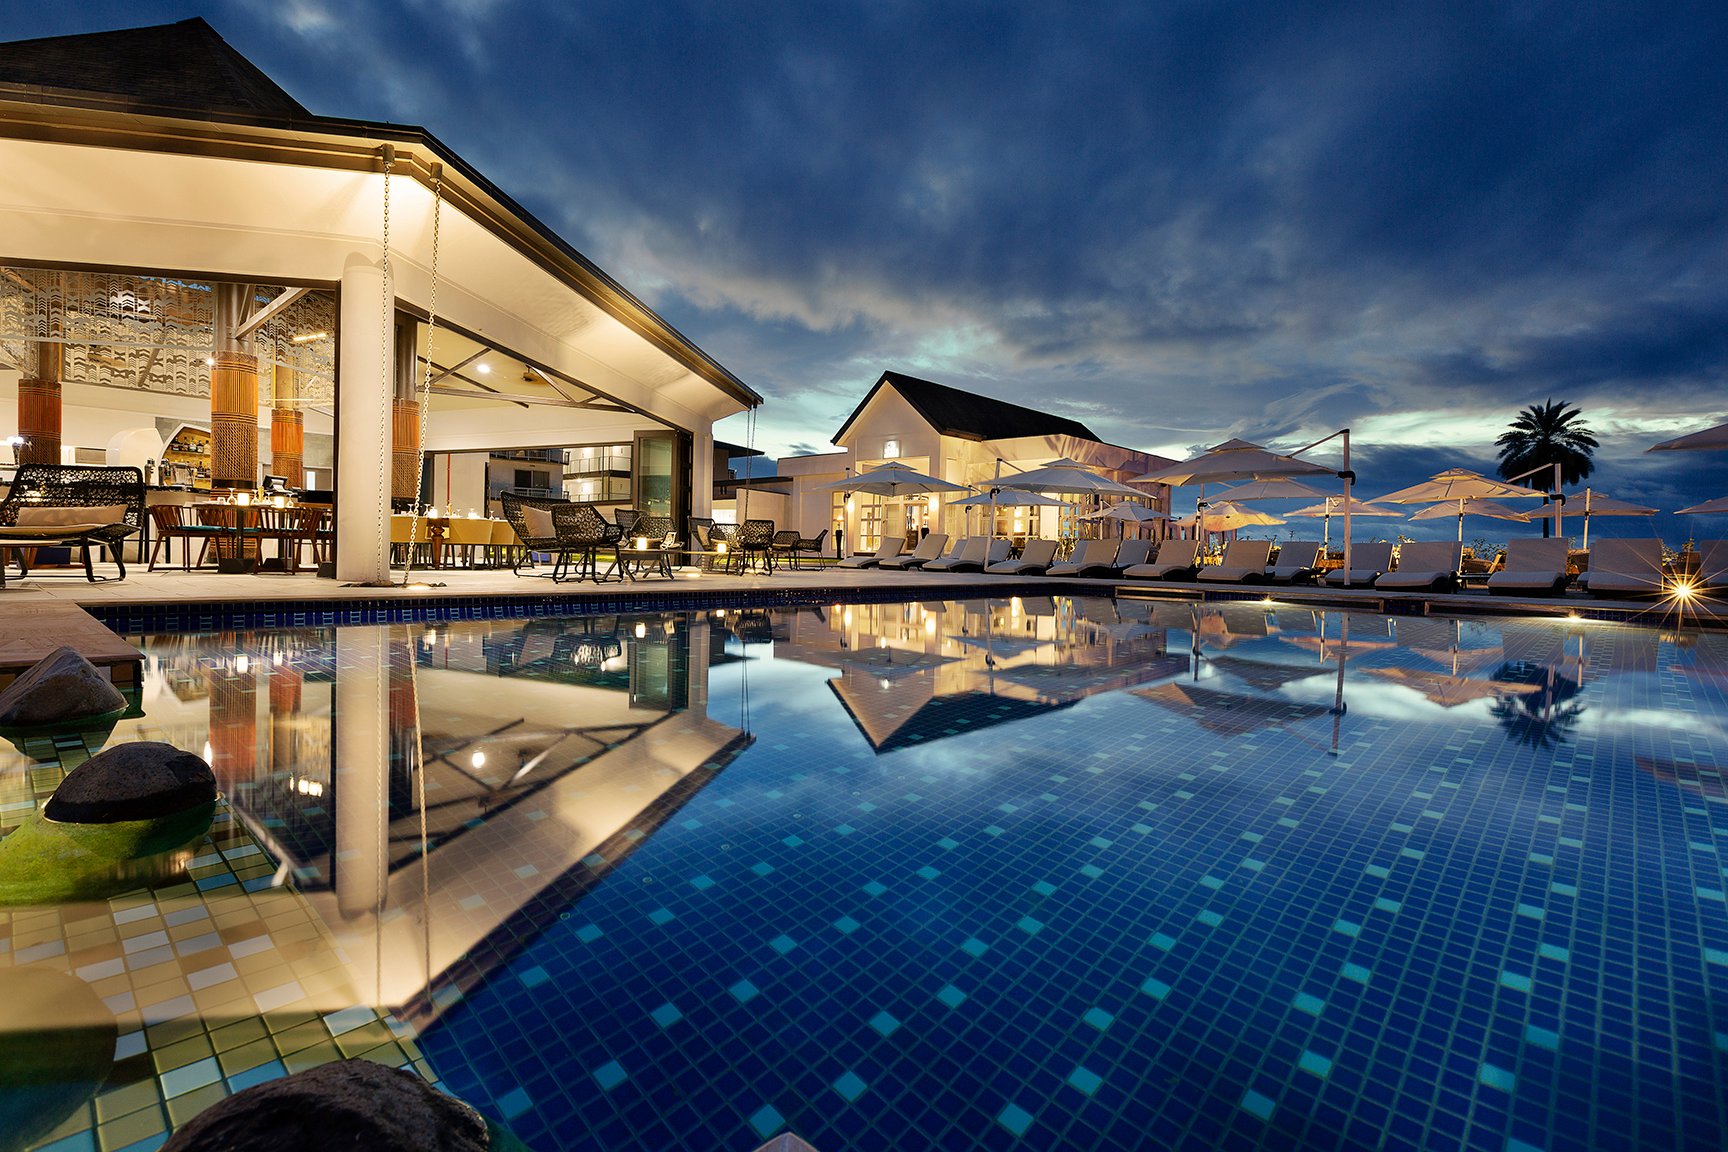 Opened in May, Accor's Pullman resort on block on Fiji | Hotel Management